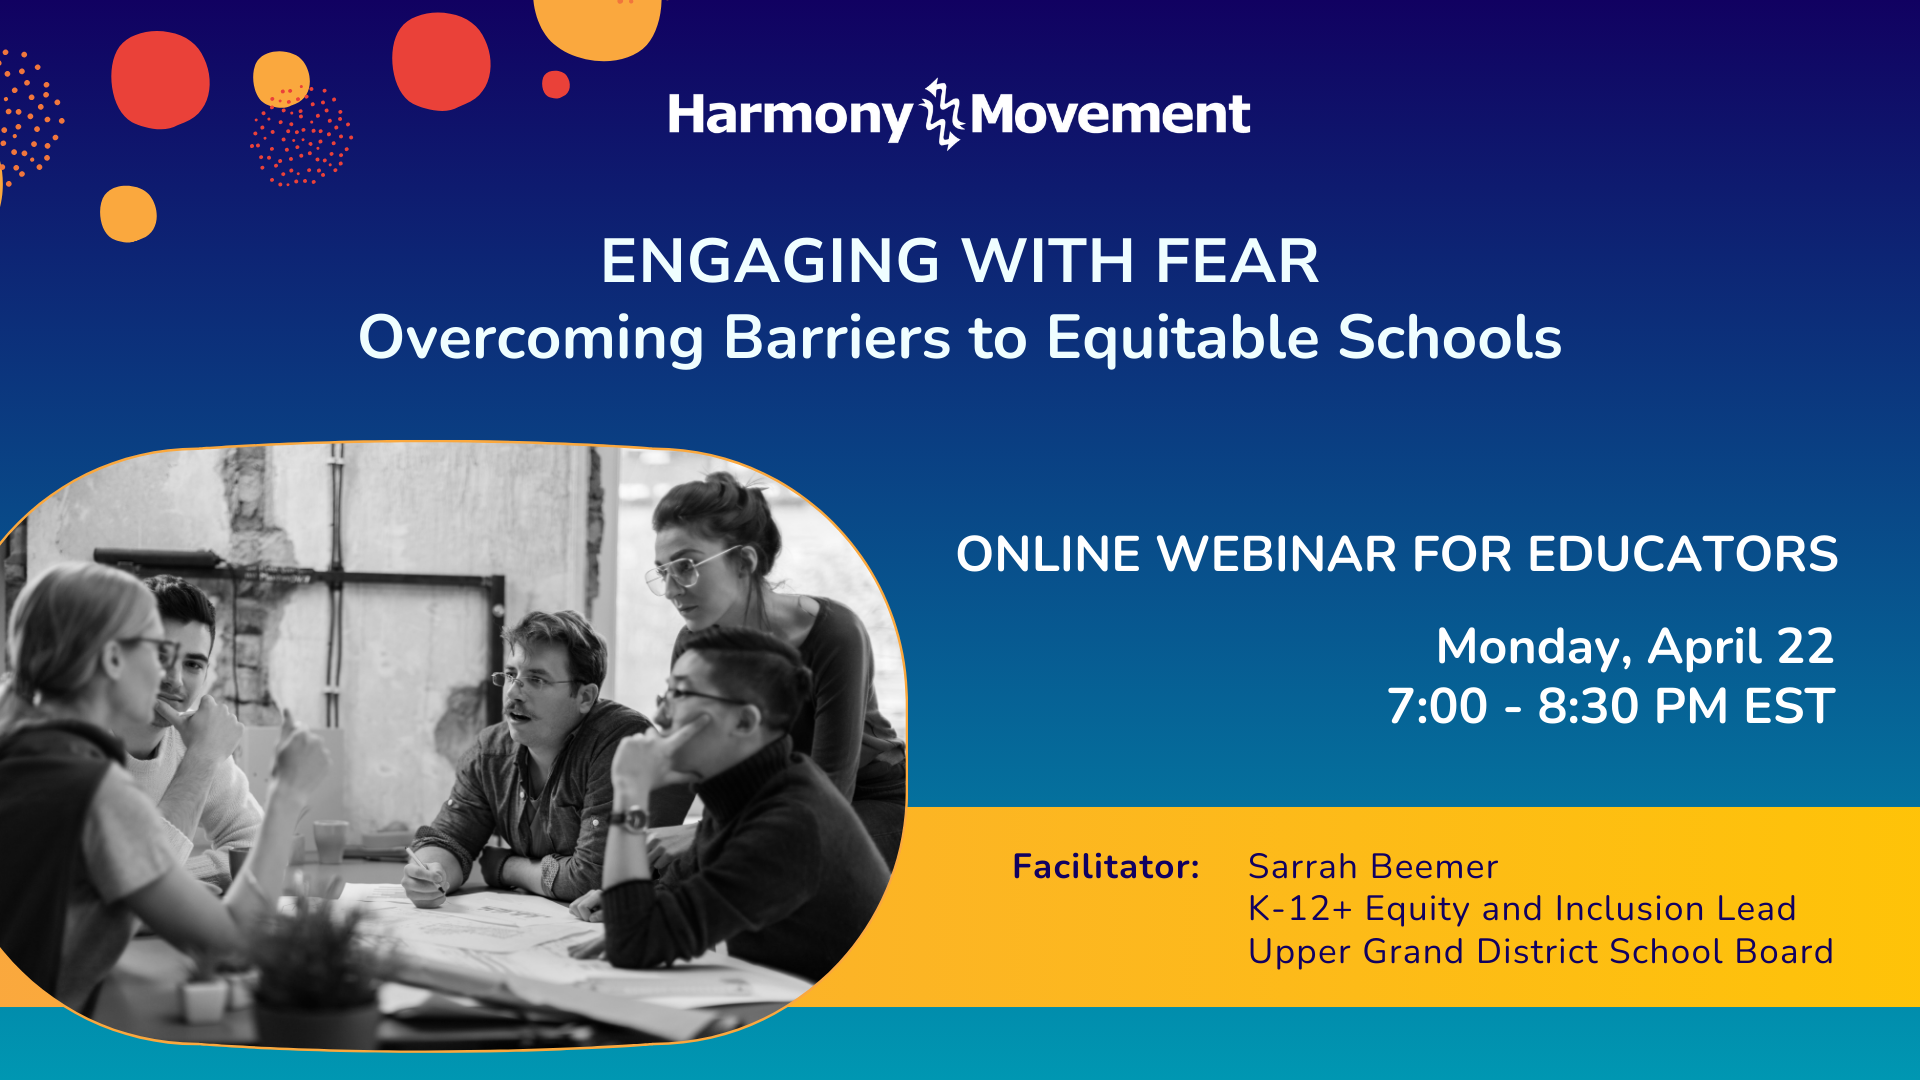 Harmony Movement Engaging with Fear Overcoming Barriers to Equitable Schools Online Webinar for Educators Monday, April 22 7:00-8:30 pm EST Facilitator: Sarrah Beemer K-12+ Equity and InclusionLead Upper Grand District School Board